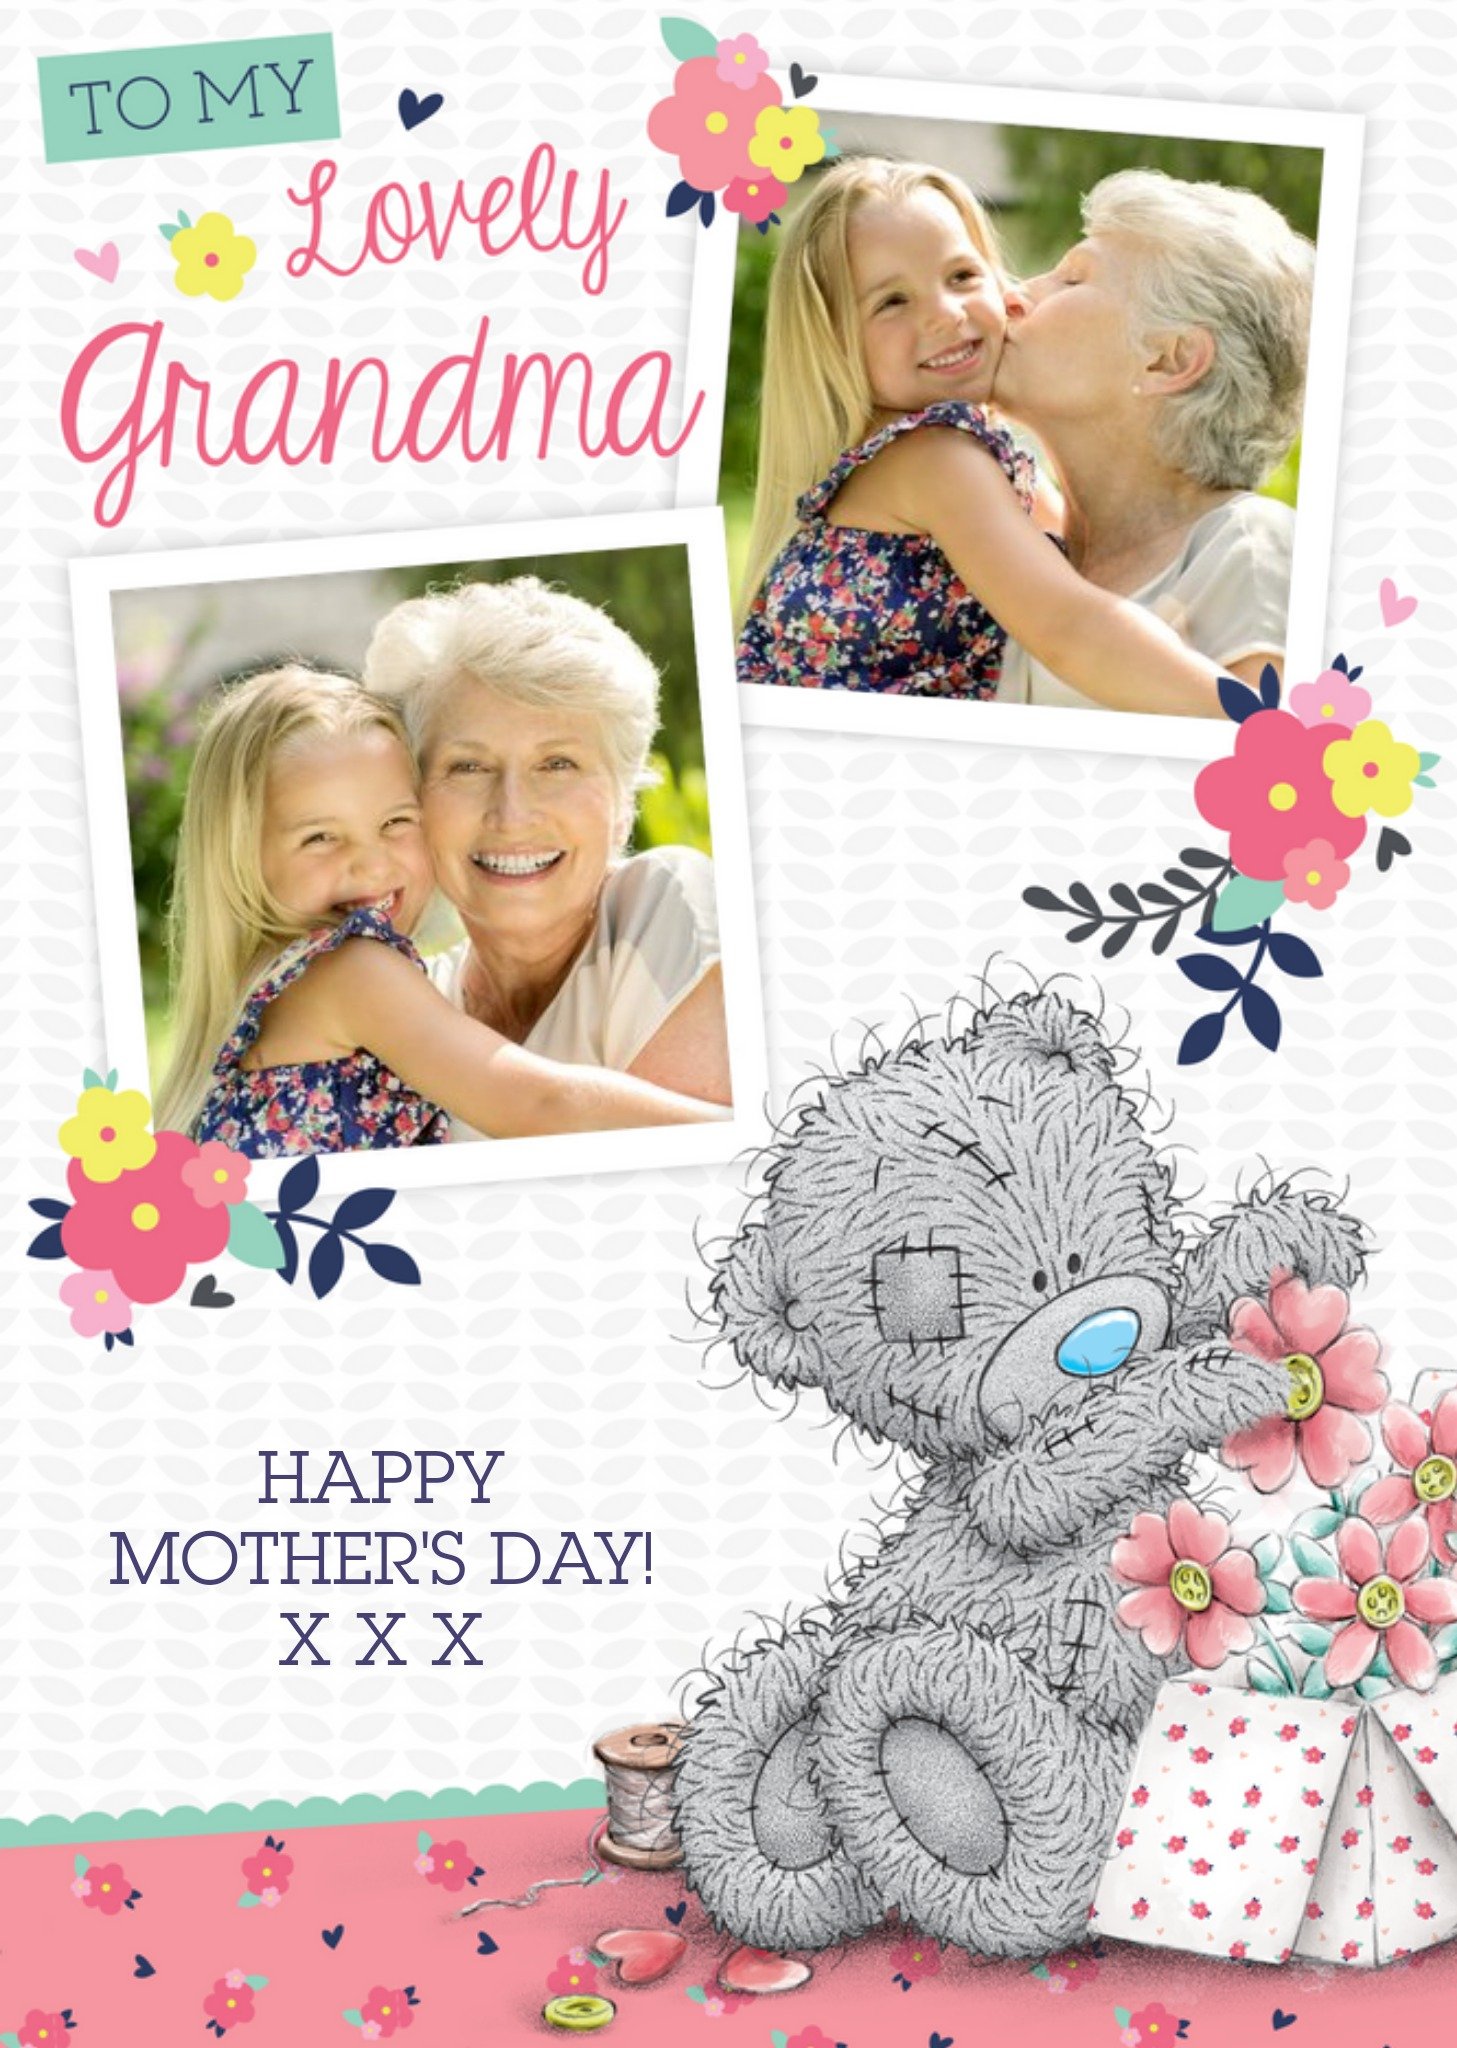 Me To You Mother's Day Card - Tatty Teddy - Lovely Grandma Photo Upload Ecard